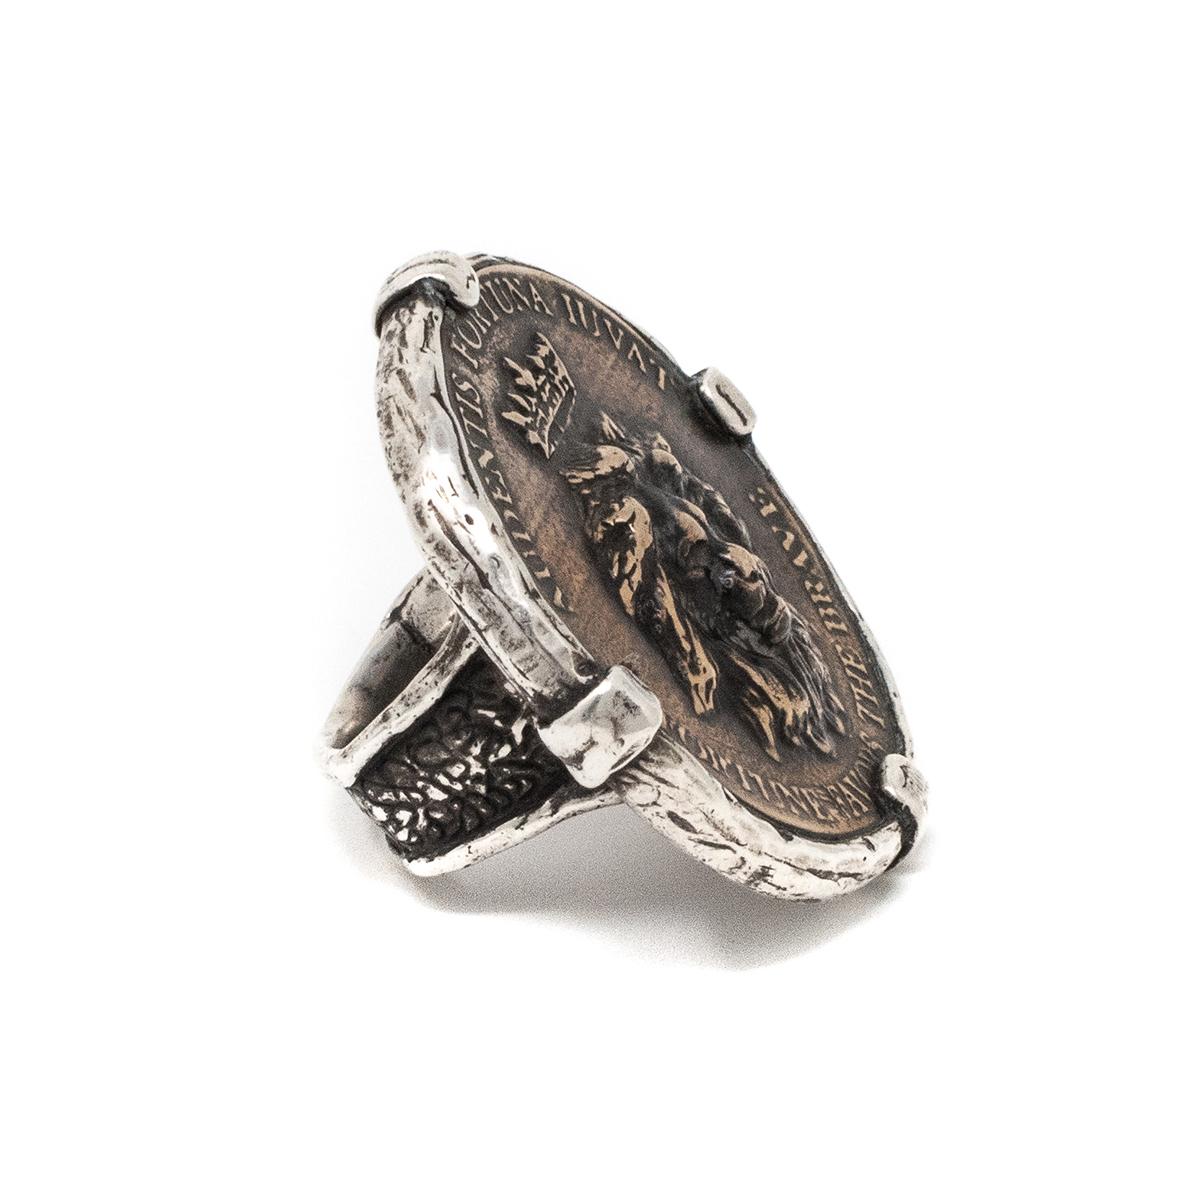 King Lion Statement Coin ring by Shannon Koszyk.  Audentis Foruna Iuvat, Fortune Favors the Brave in Latin.  Sterling wrapped bronze coin ring measures 1.5